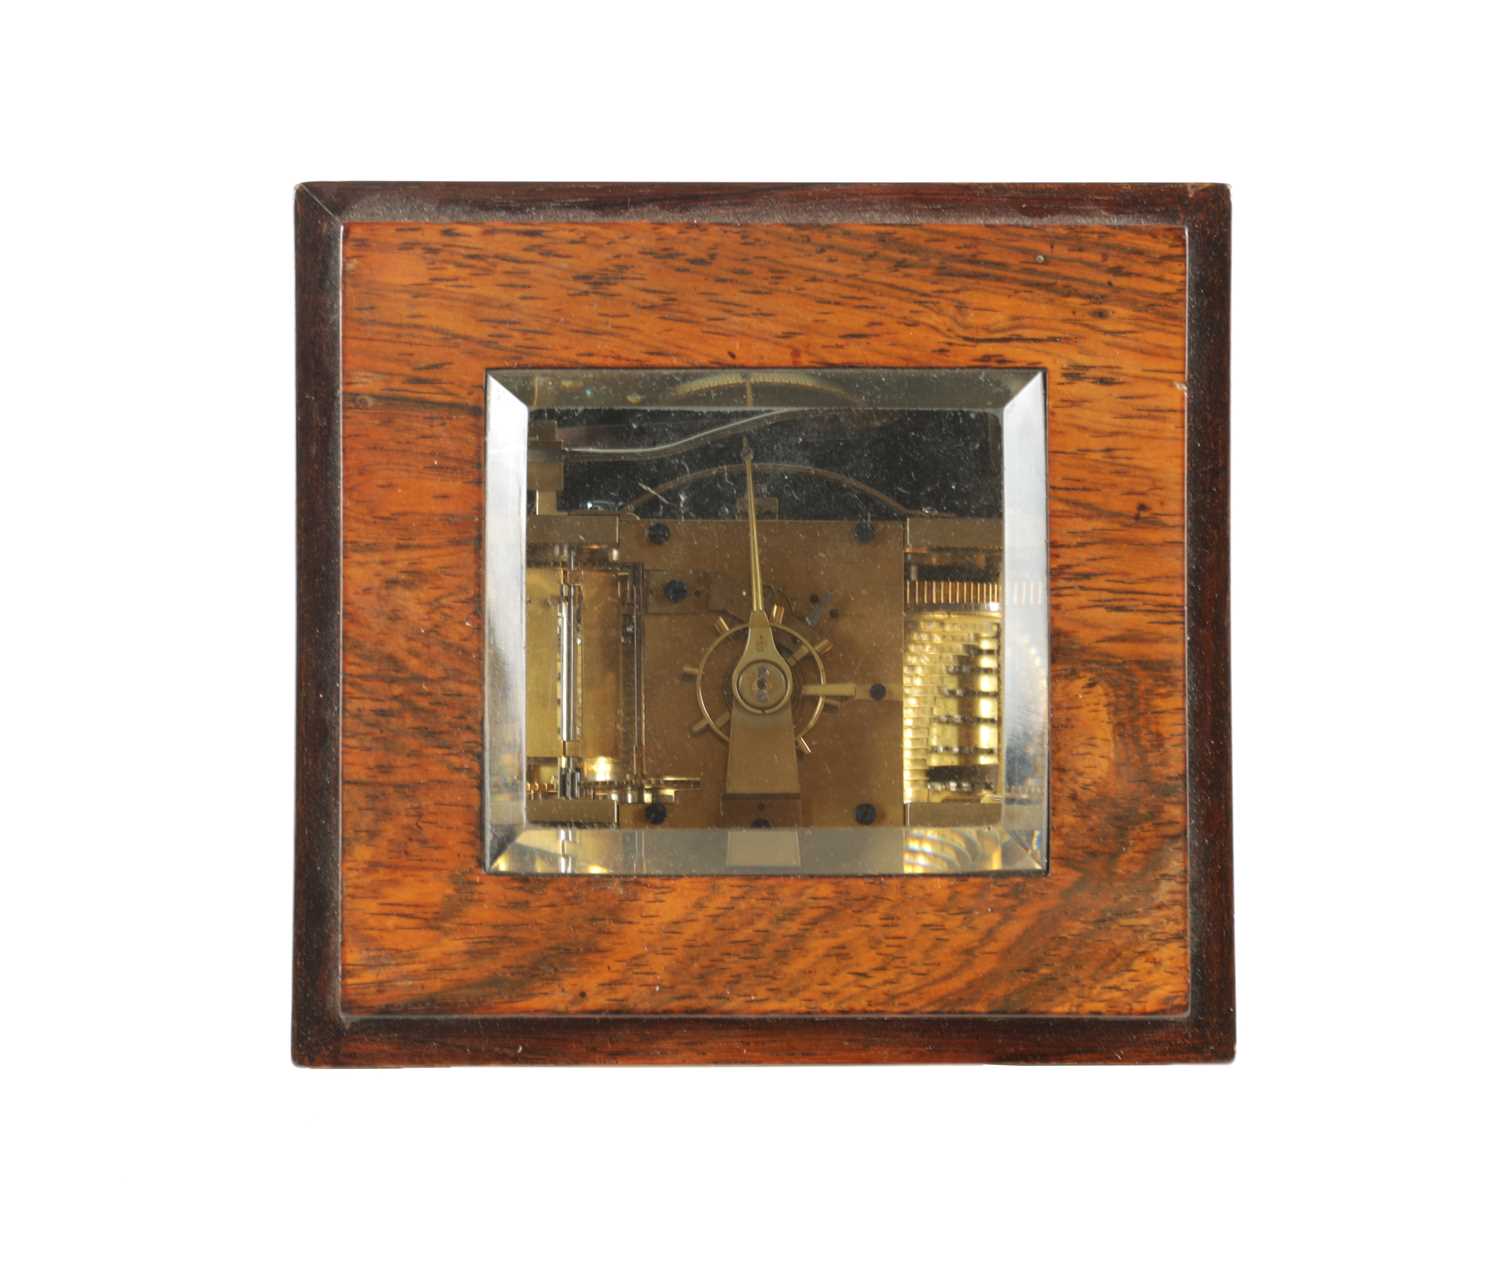 FRODSHAM, GRACECHURCH STREET, LONDON. A FINE AND SMALL ROSEWOOD DOUBLE FUSEE LIBRARY CLOCK WITH LEVE - Image 4 of 13